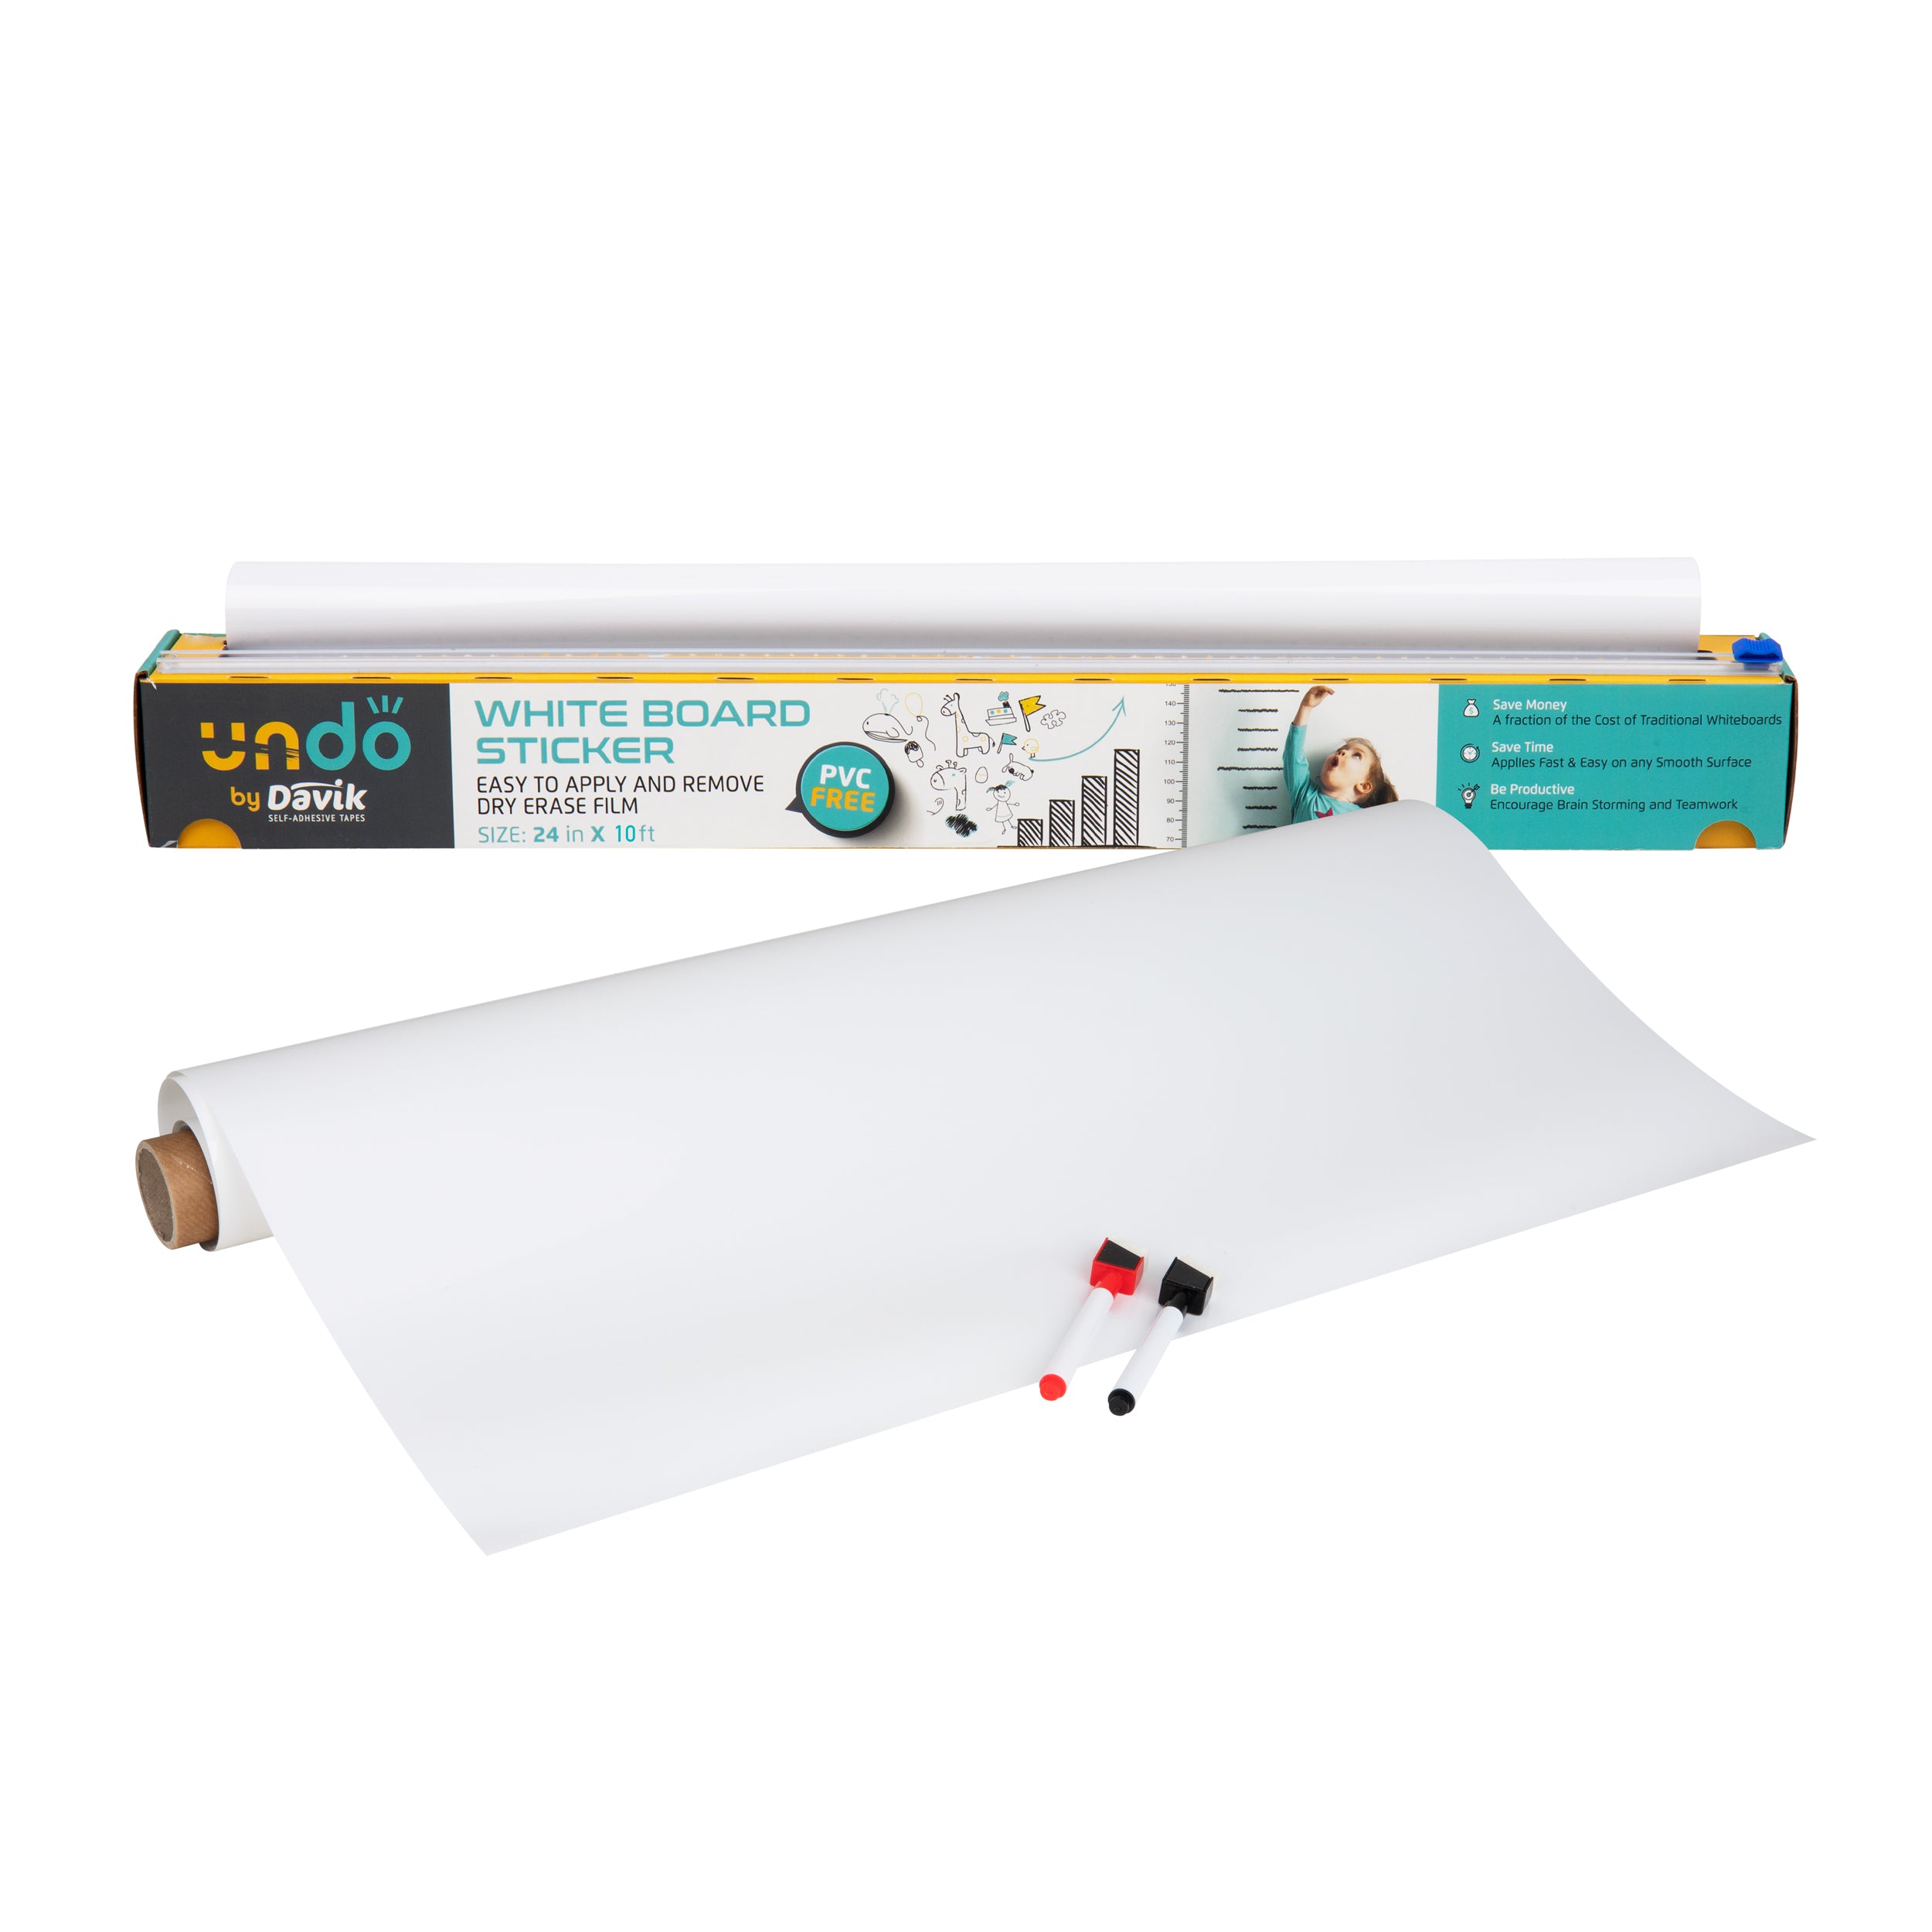 Dry Erase Tape – somewhat abstract